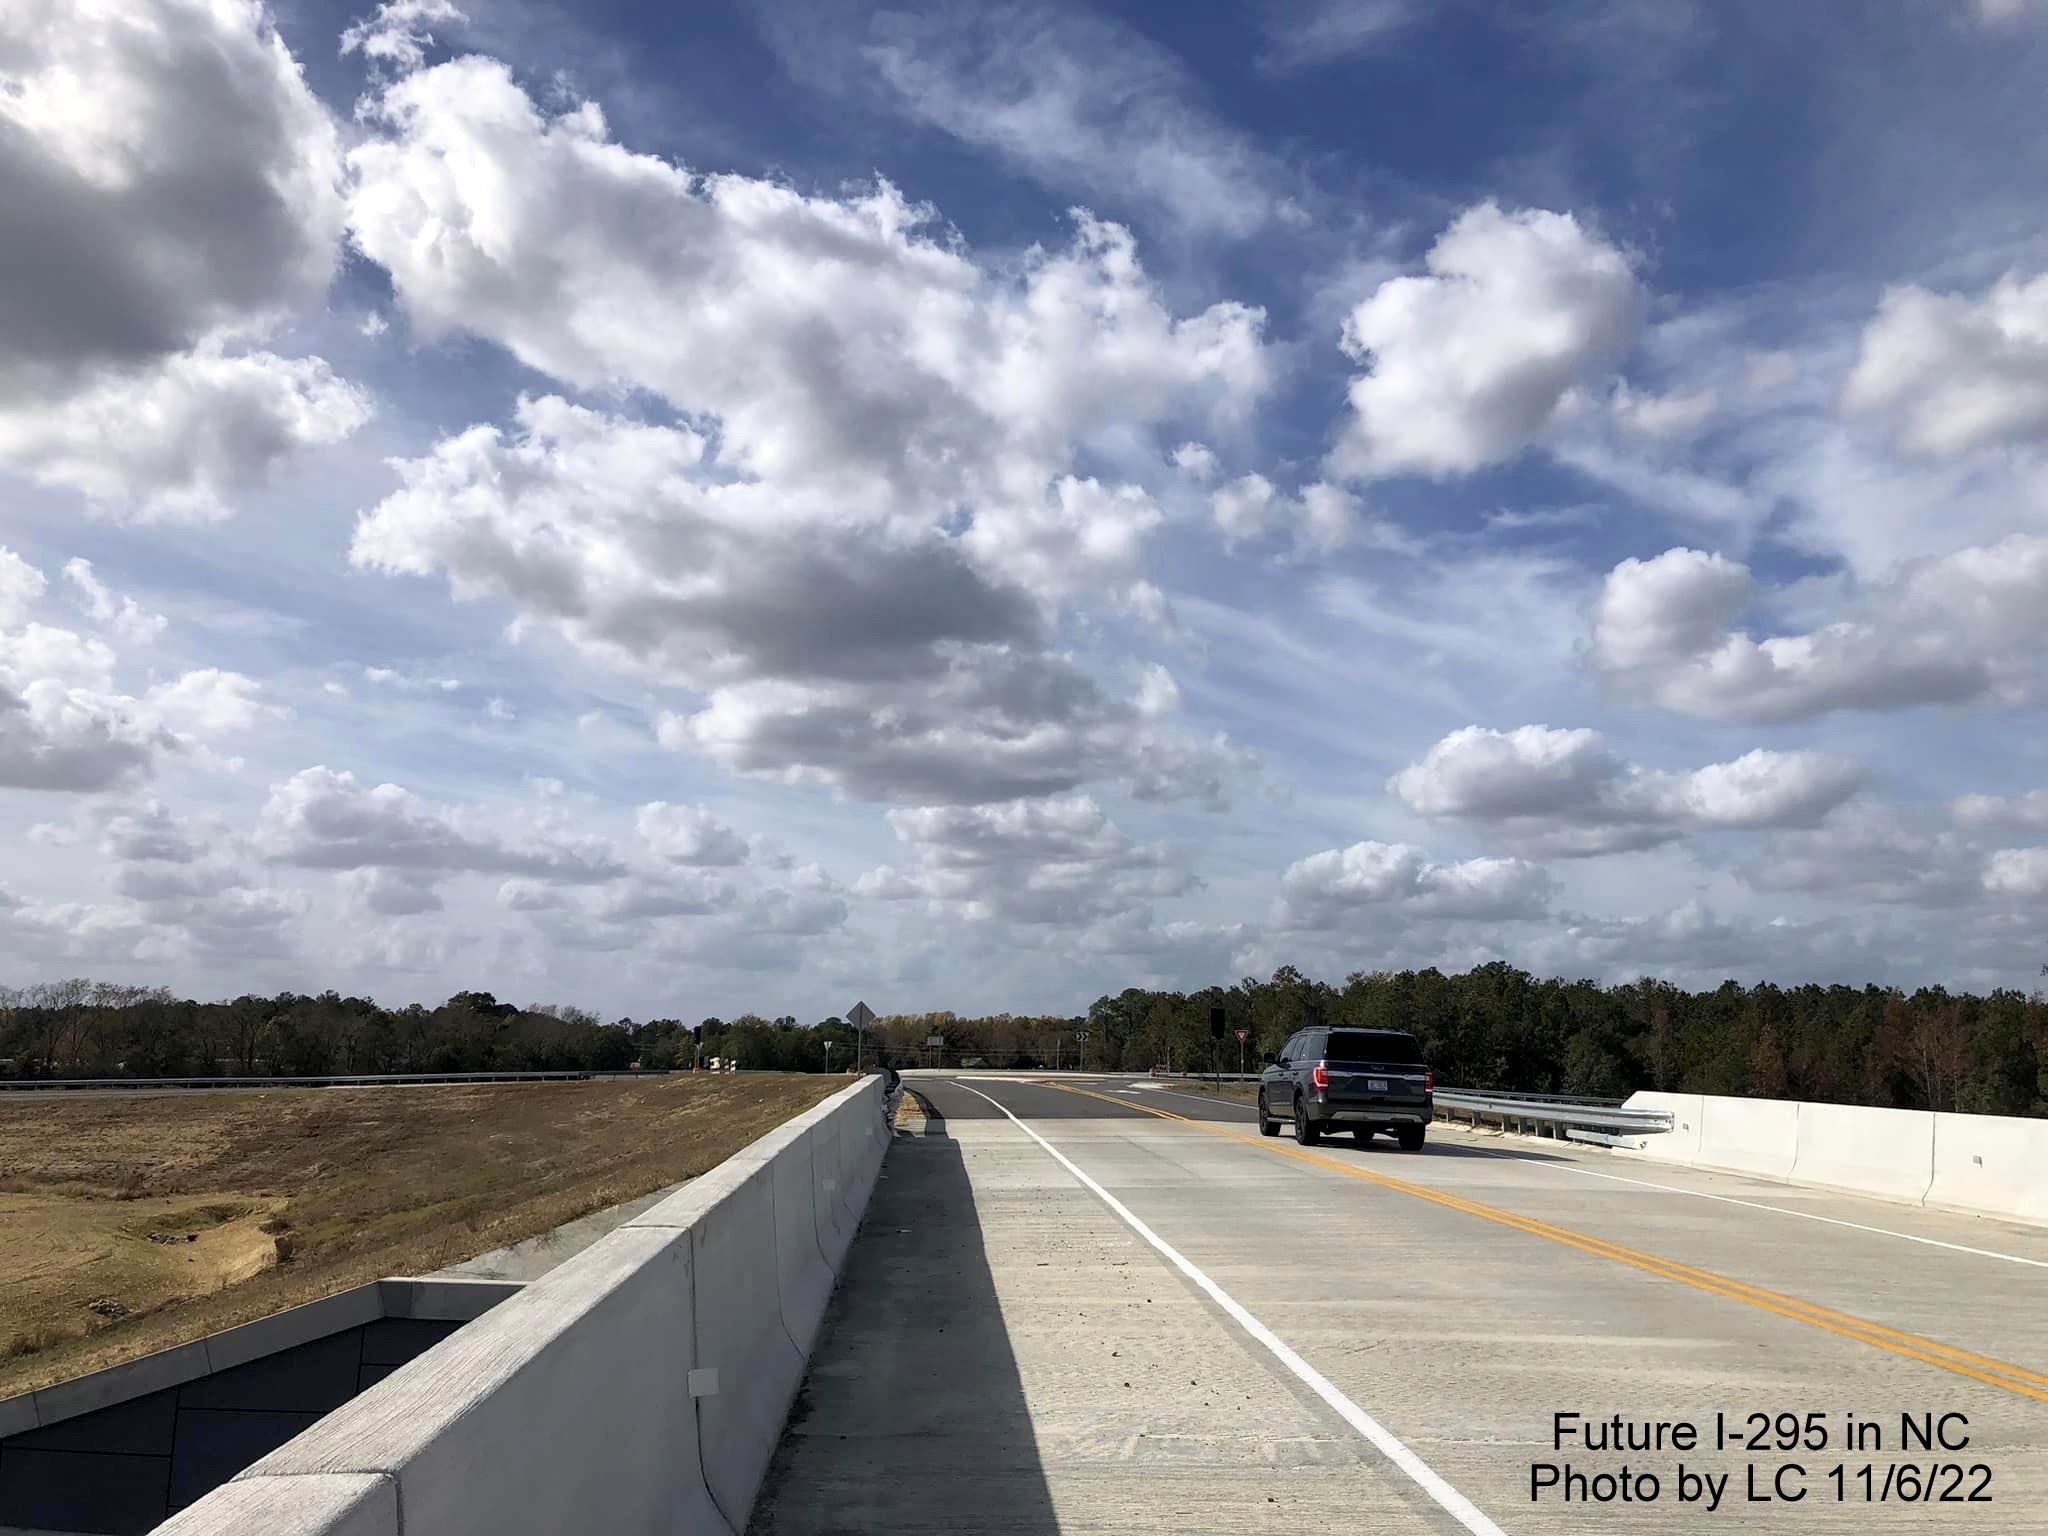 Image taken looking west along Black Bridge Road bridge toward new roundabout with ramps for soon to 
        be opened section of Fayetteville Outer Loop to Parkton/Leeper Roads, by LC, November 2022